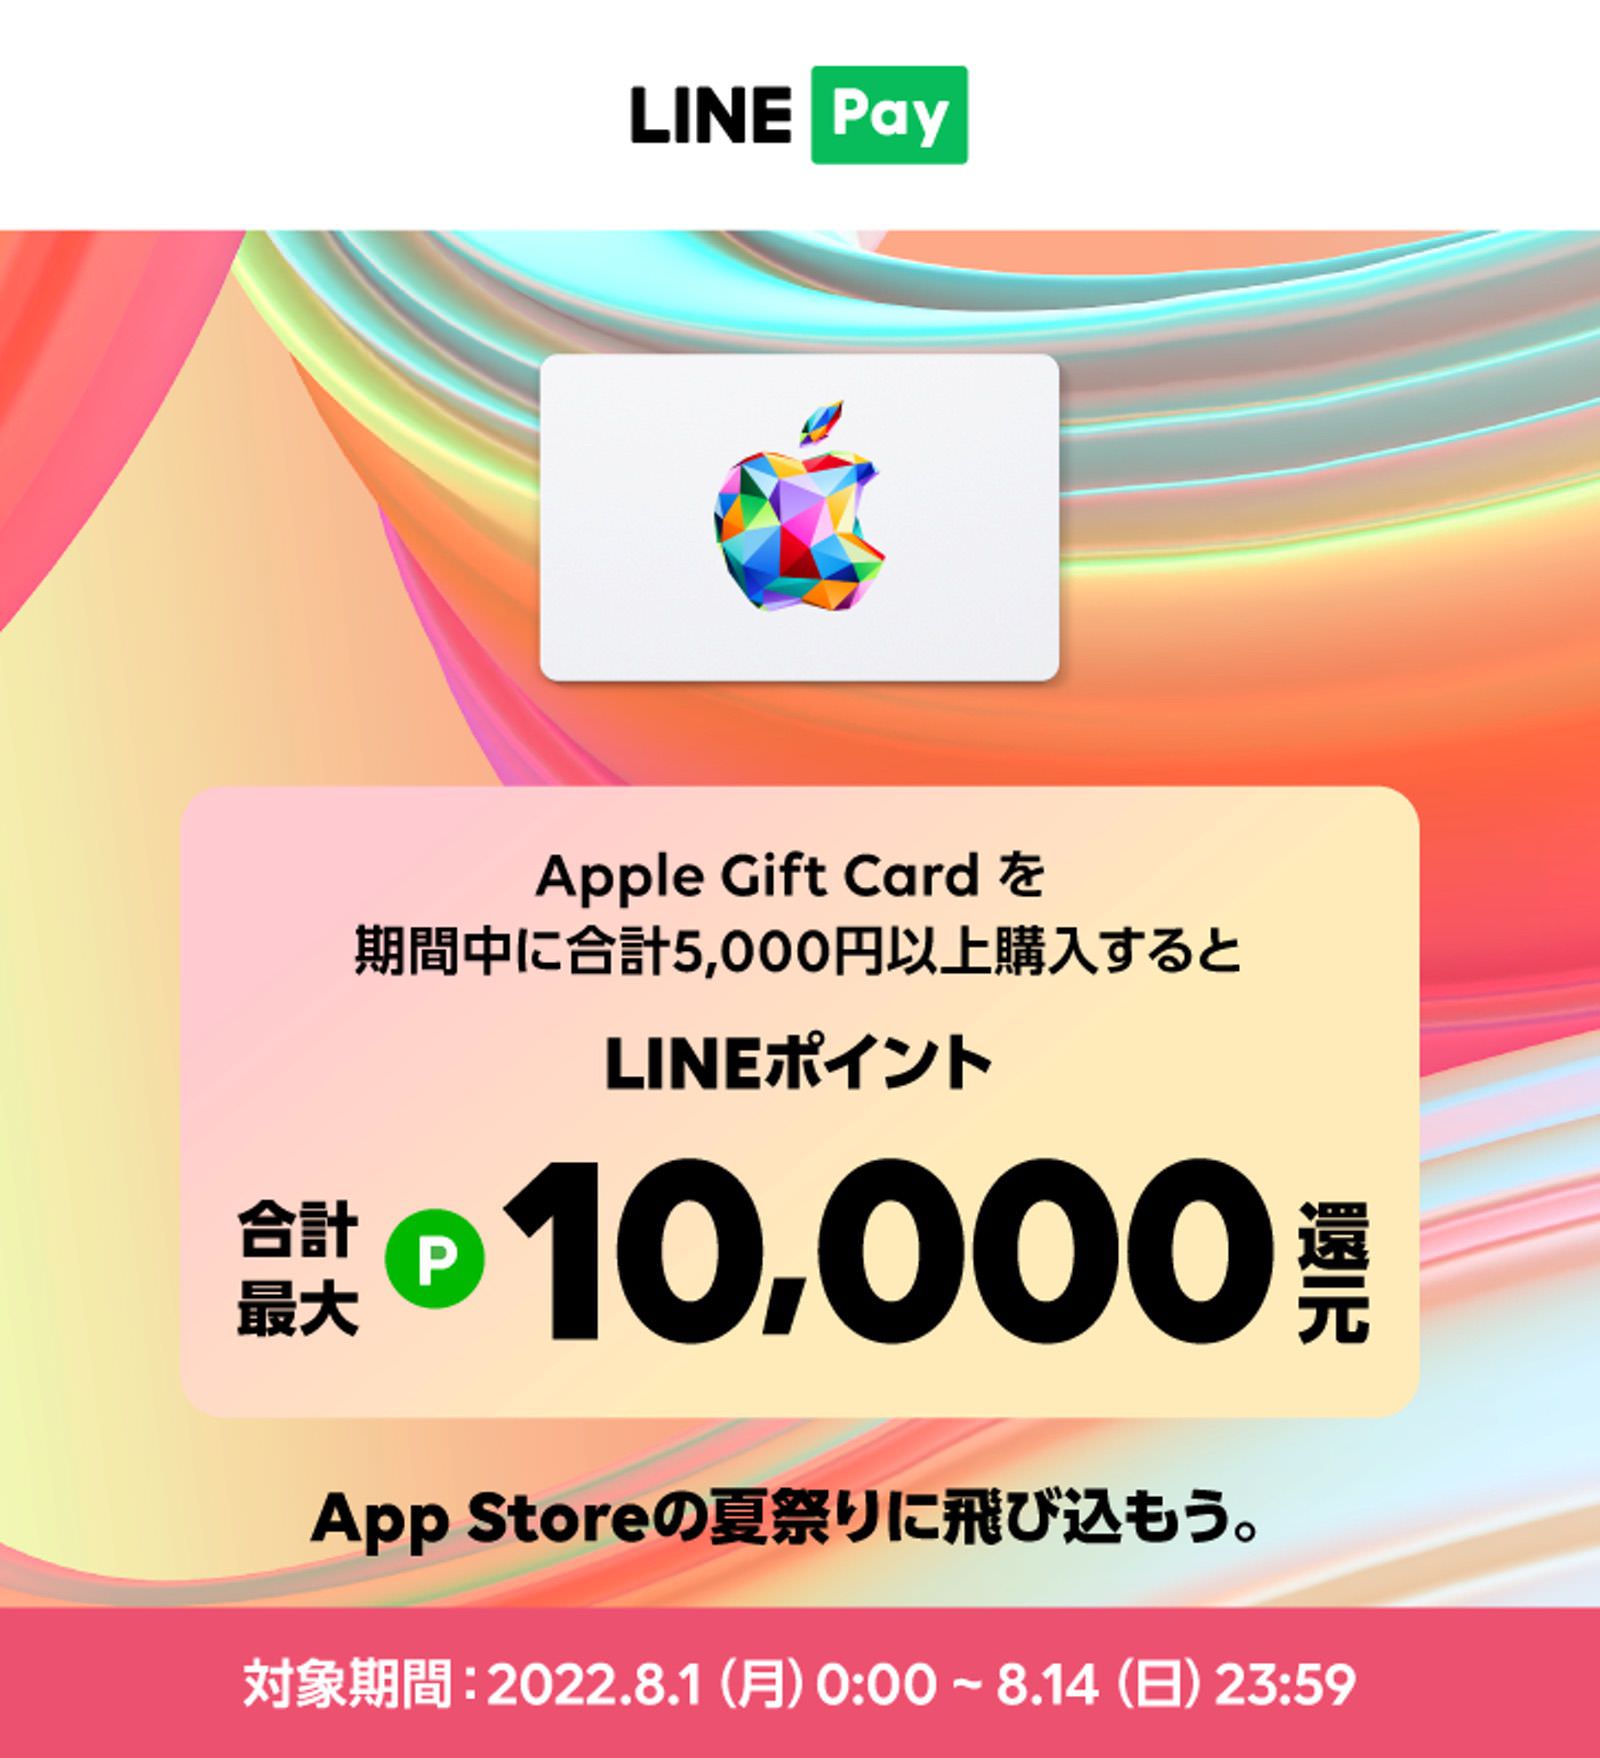 LINE-Pay-Apple-Gift-Card-Campaign-01.jpg